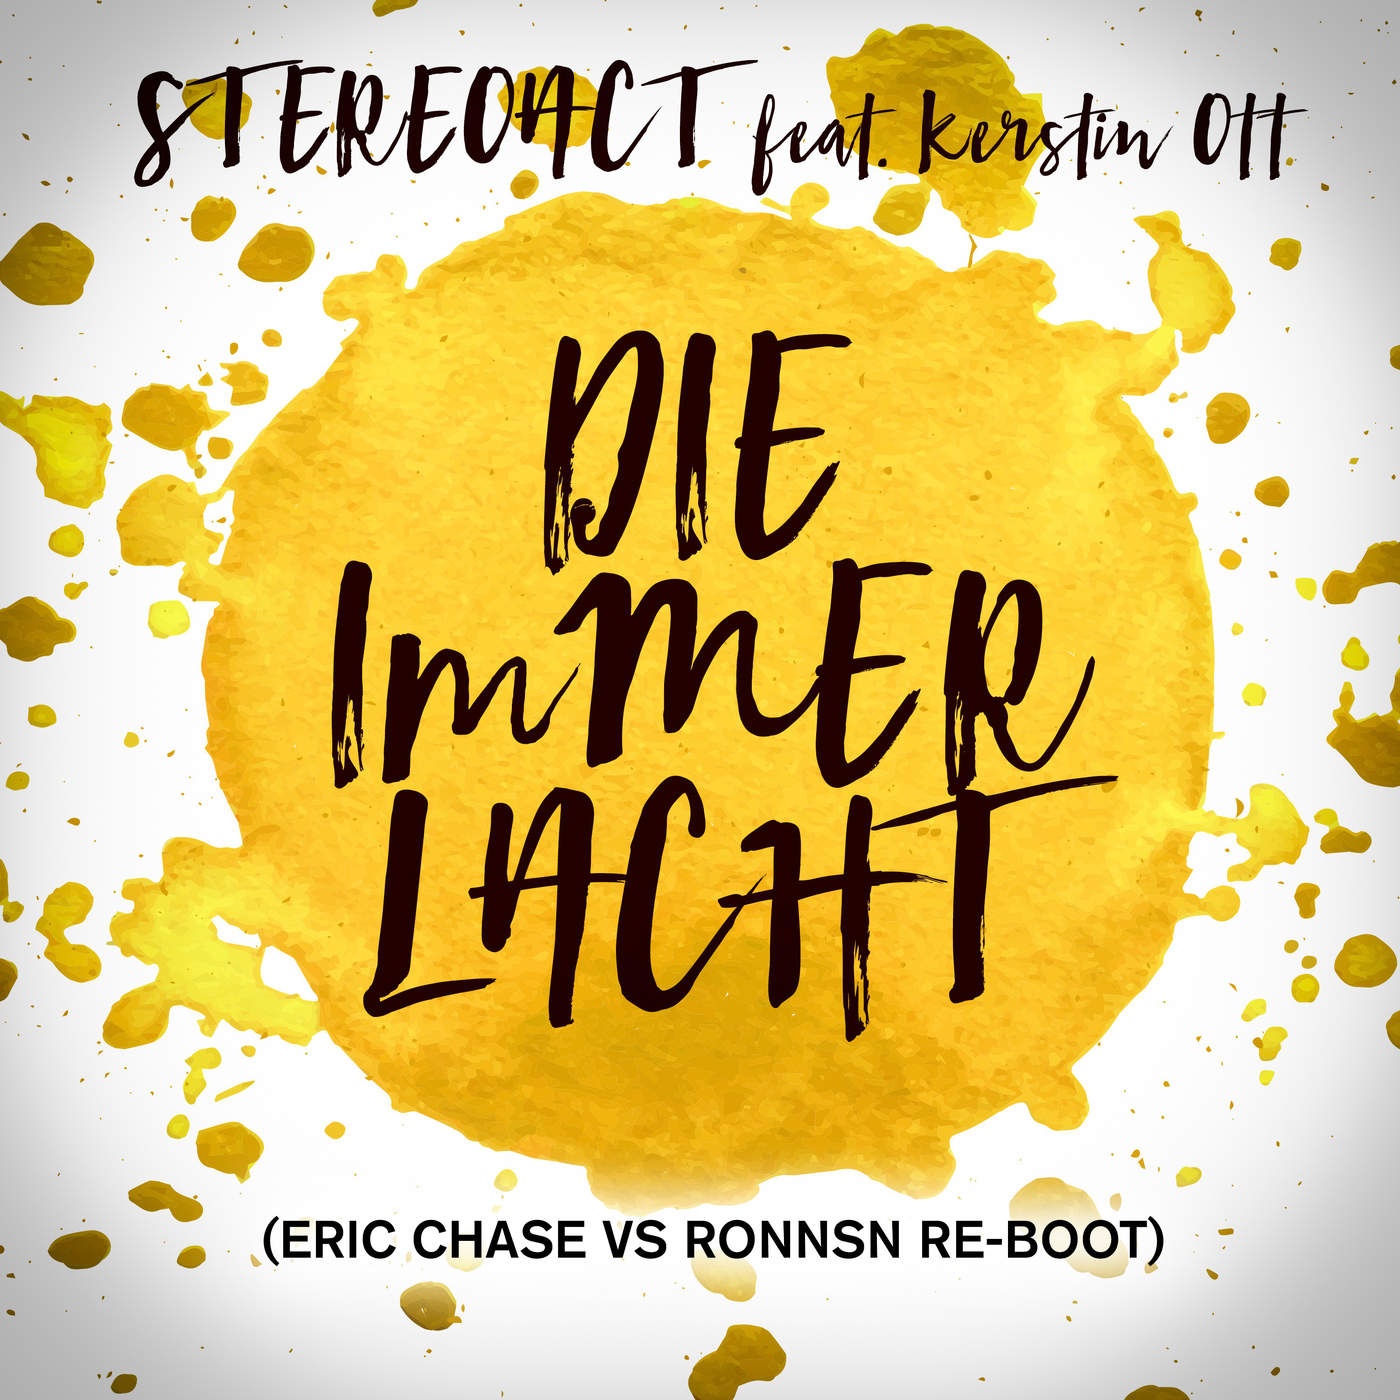 Die immer lacht (feat. Kerstin Ott) [Eric Chase vs. Ronnsn Re-Boot]